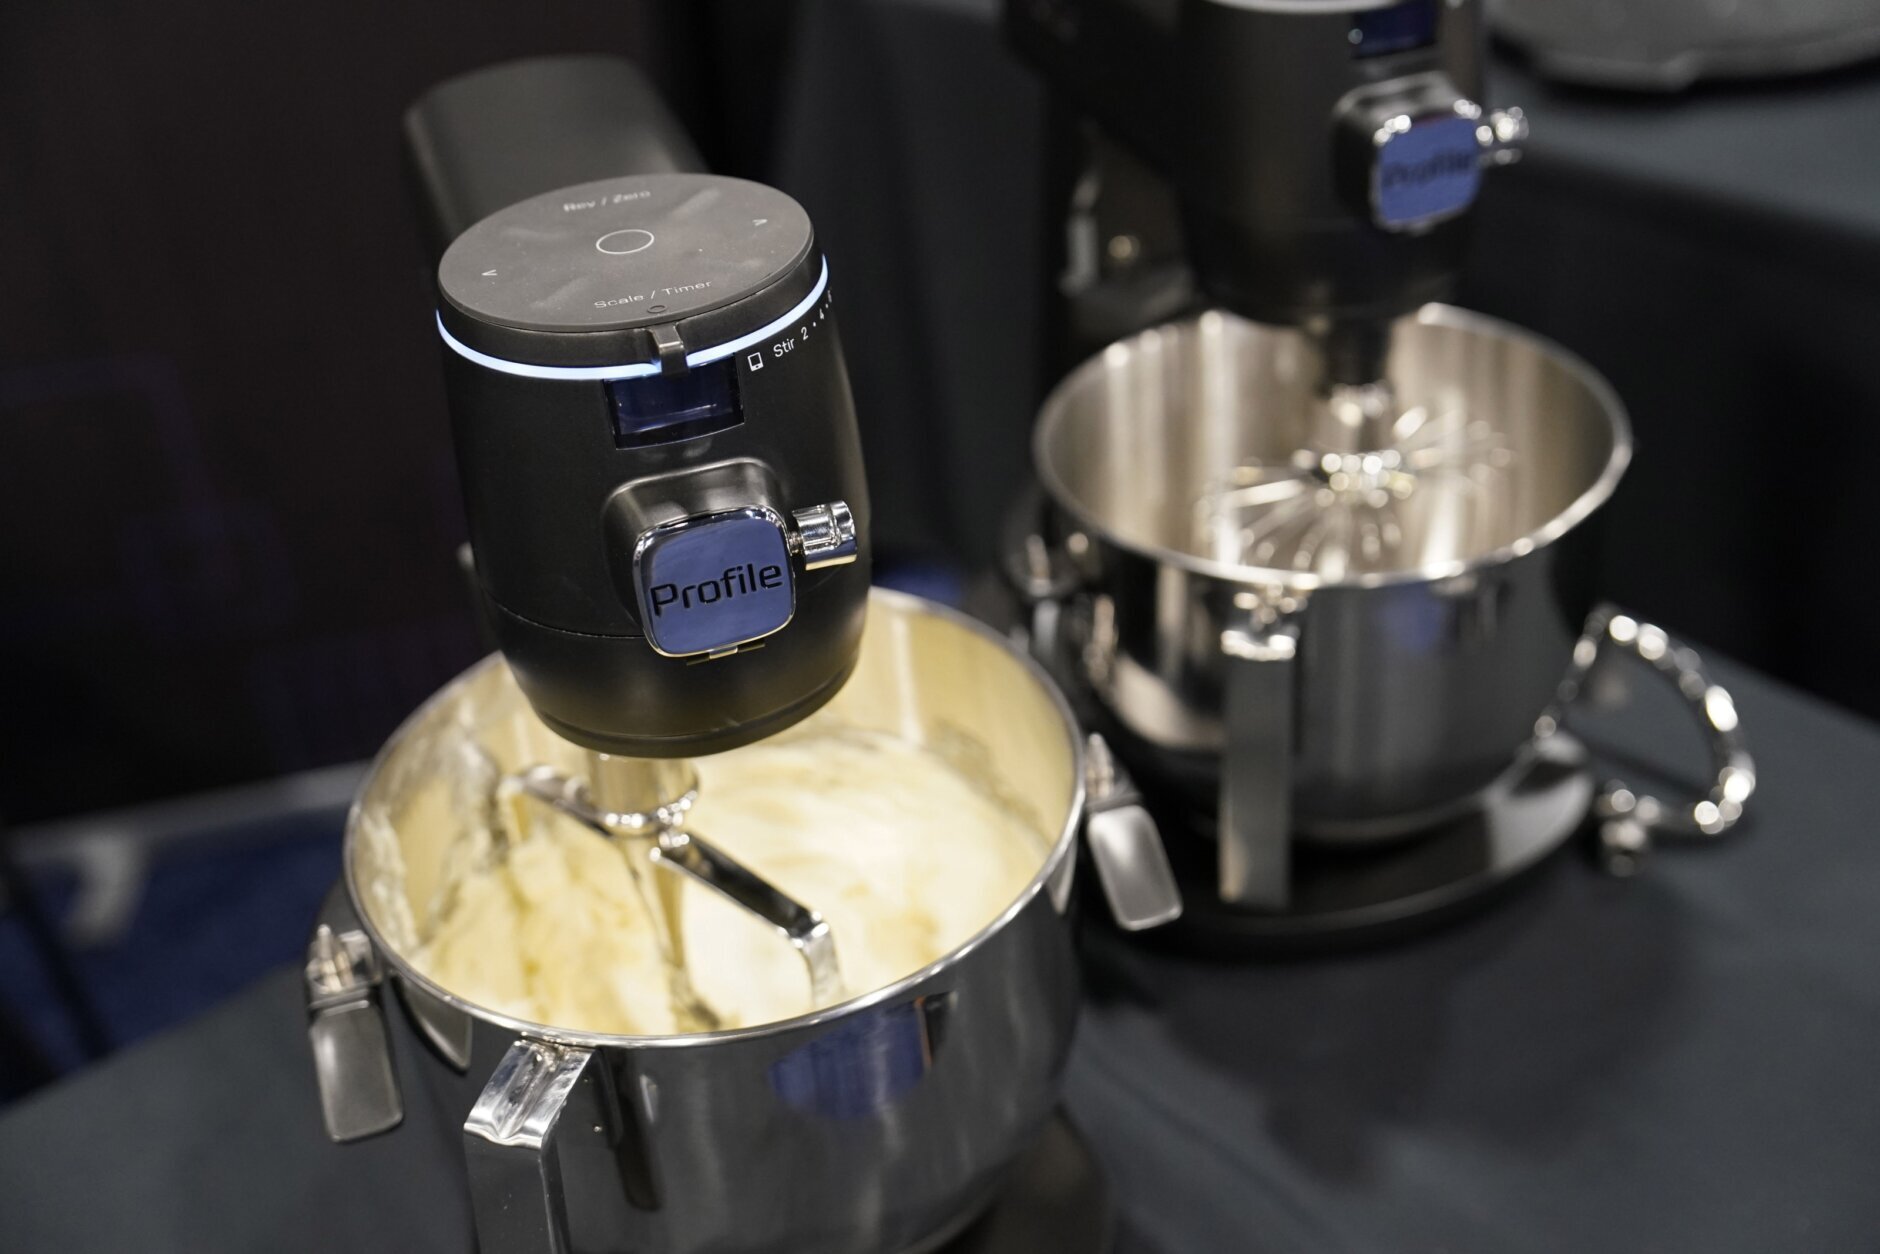 The GE Profile Smart Mixer snags Honoree award at CES 2023